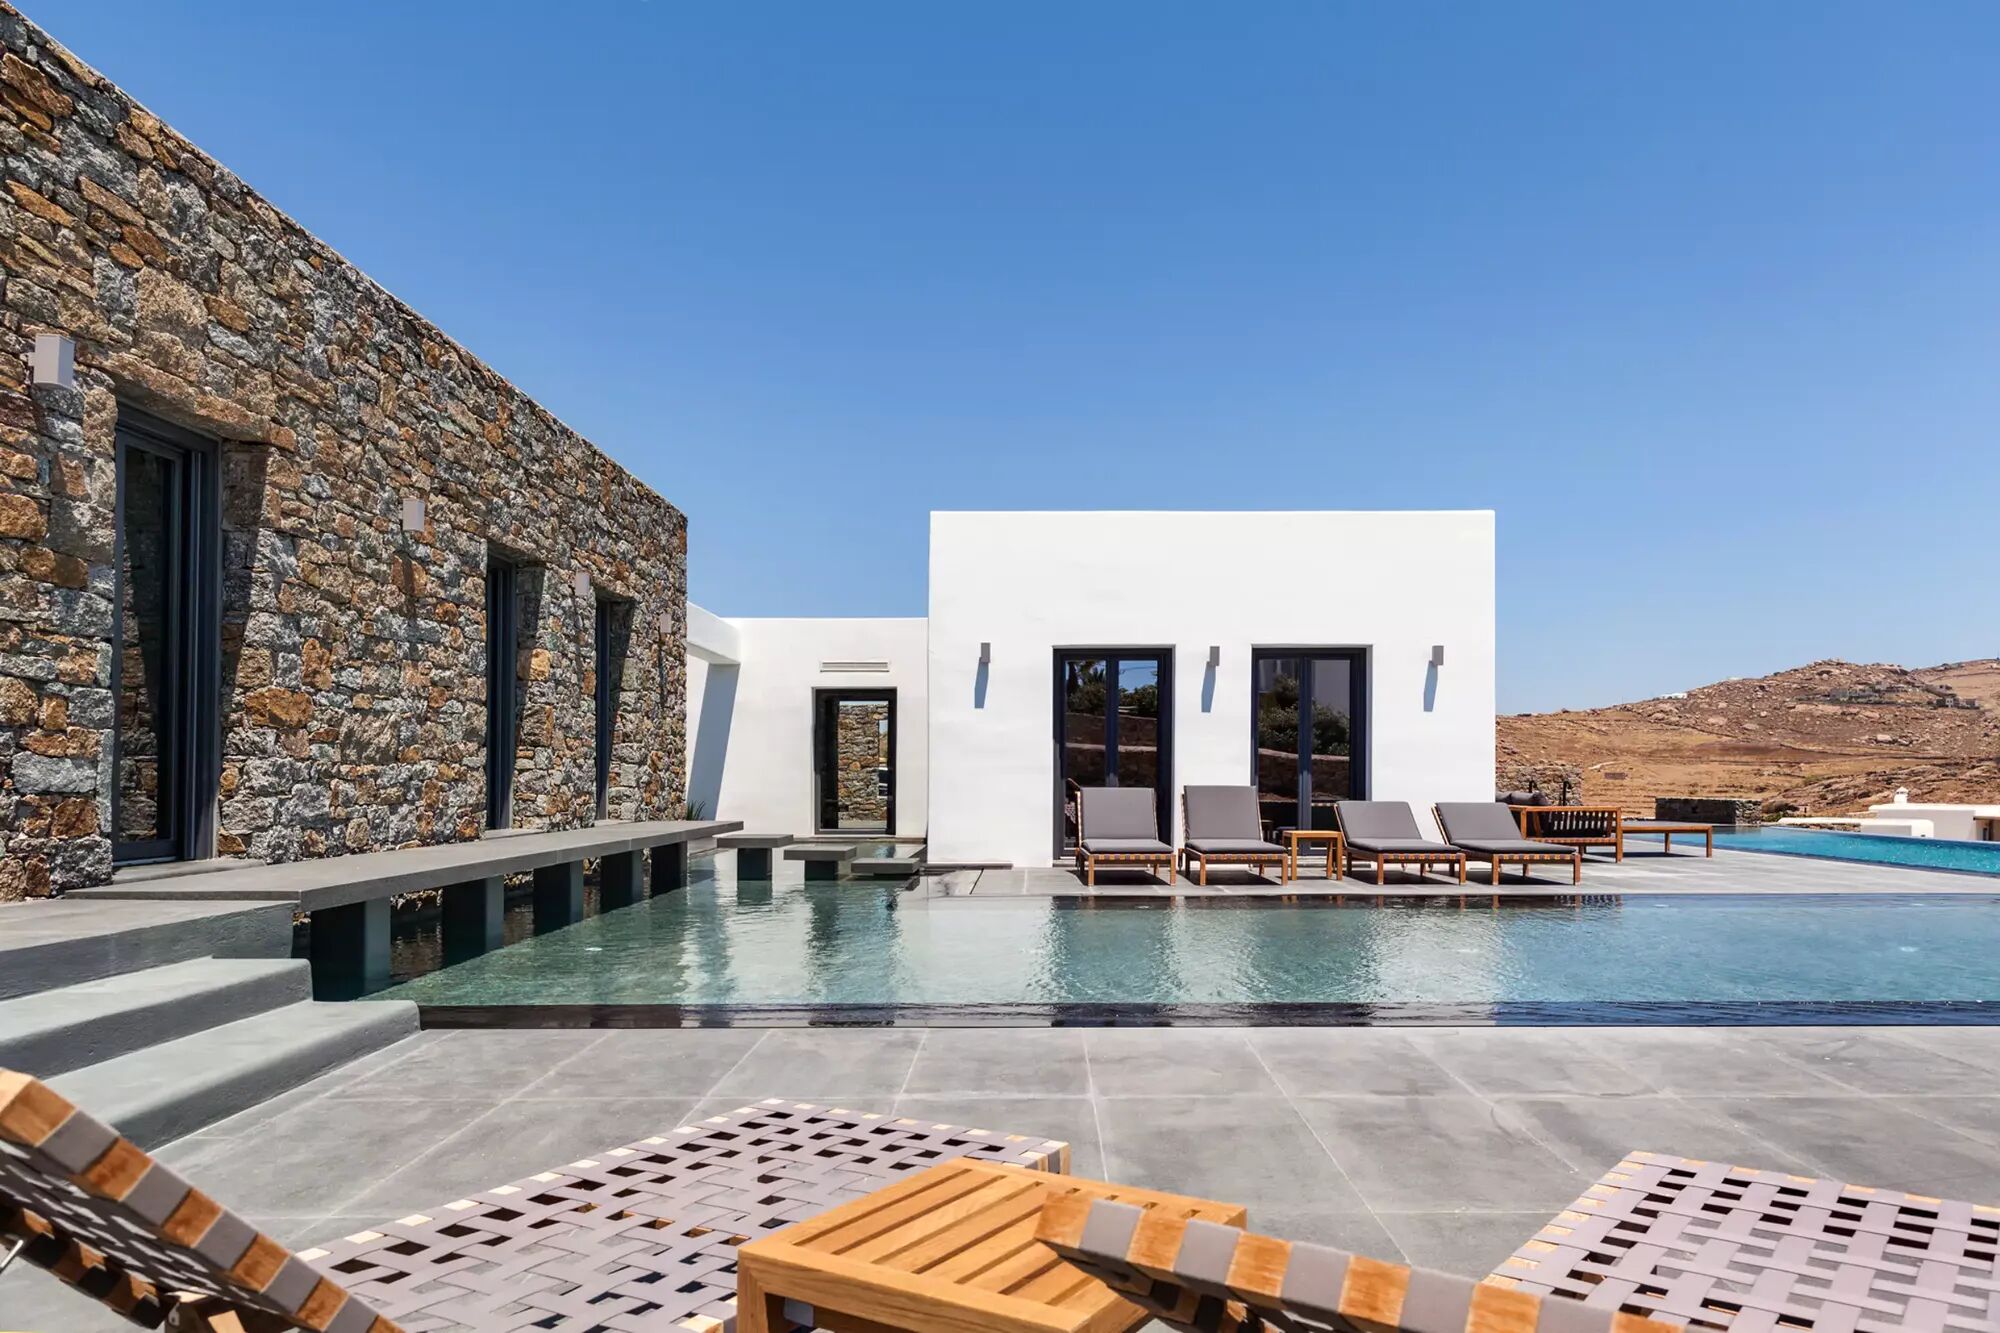 The sunloungers and modern pool outside Villa Manifica in Mykonos